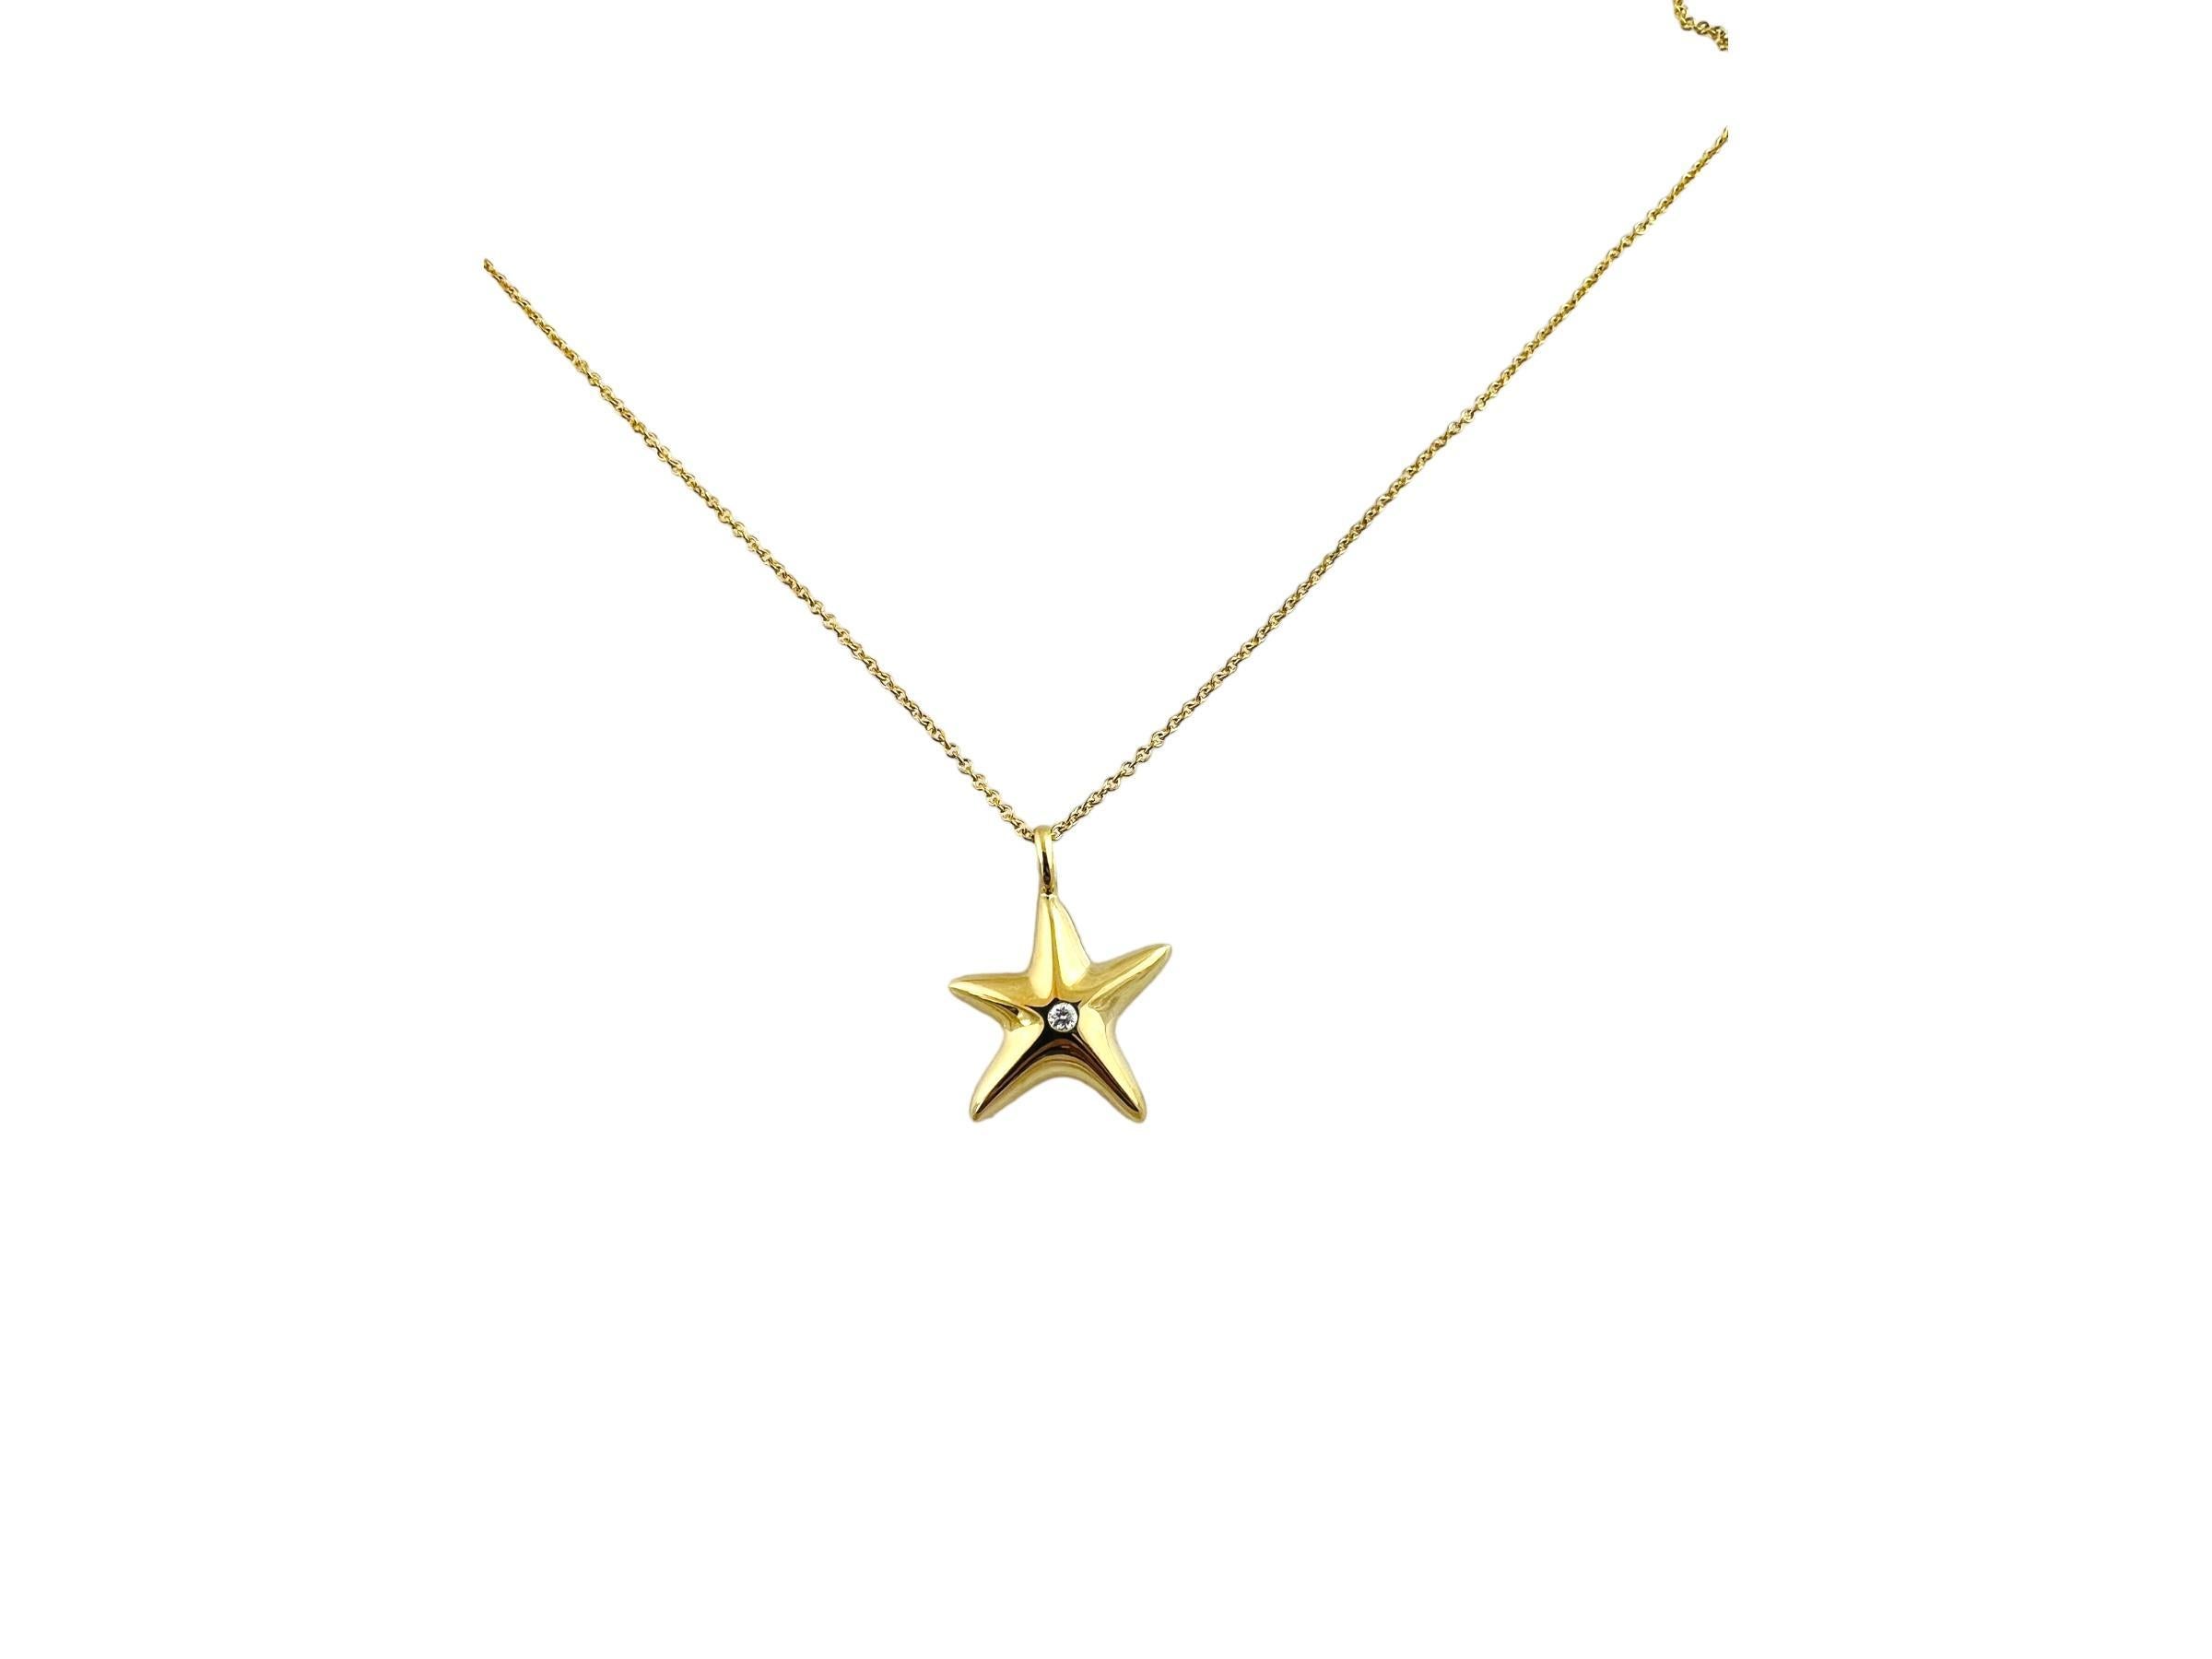 Vintage Tiffany & Co. 18K Yellow Gold Diamond Starfish Pendant Necklace

This beautiful starfish pendant necklace is set in 18K yellow gold.

Tiffany chain is approx. 16